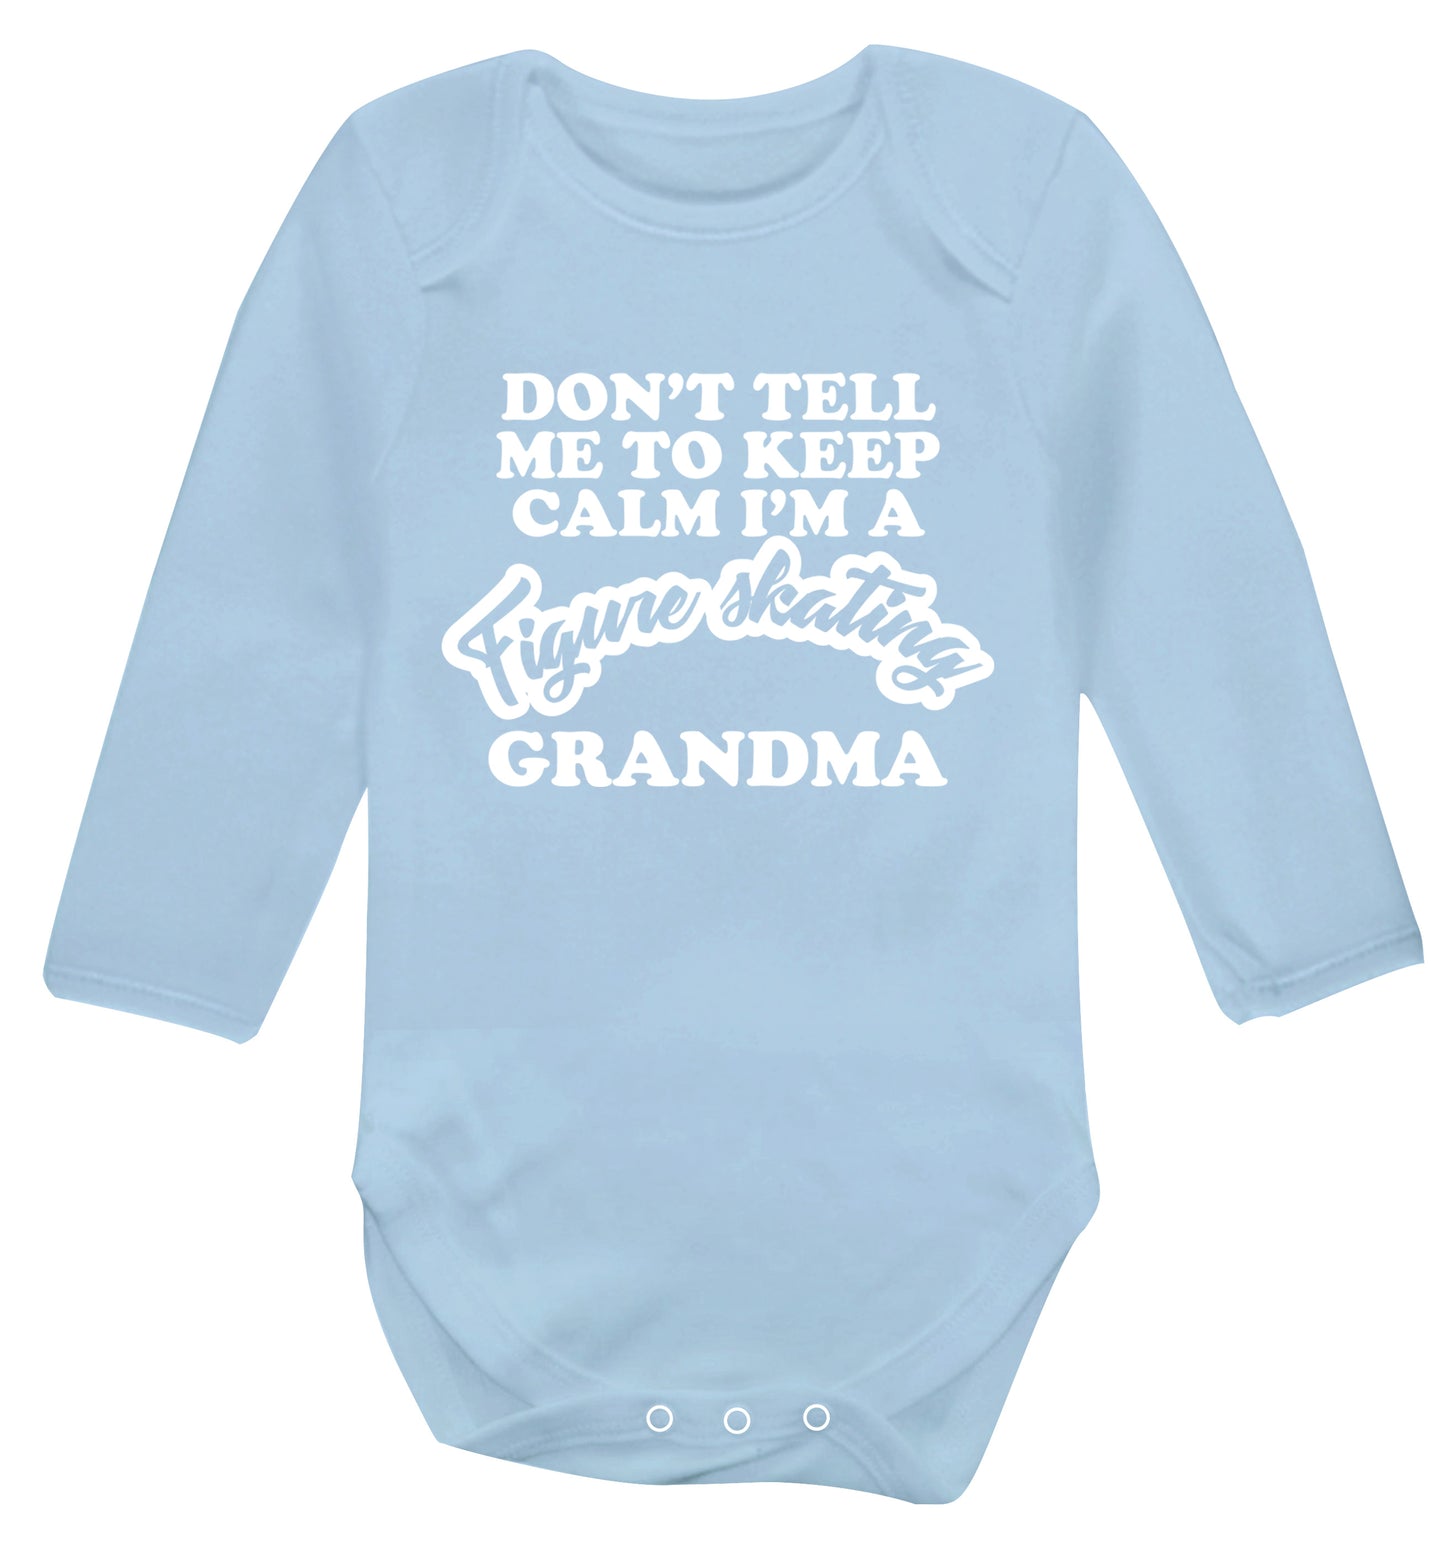 Don't tell me to keep calm I'm a figure skating grandma Baby Vest long sleeved pale blue 6-12 months